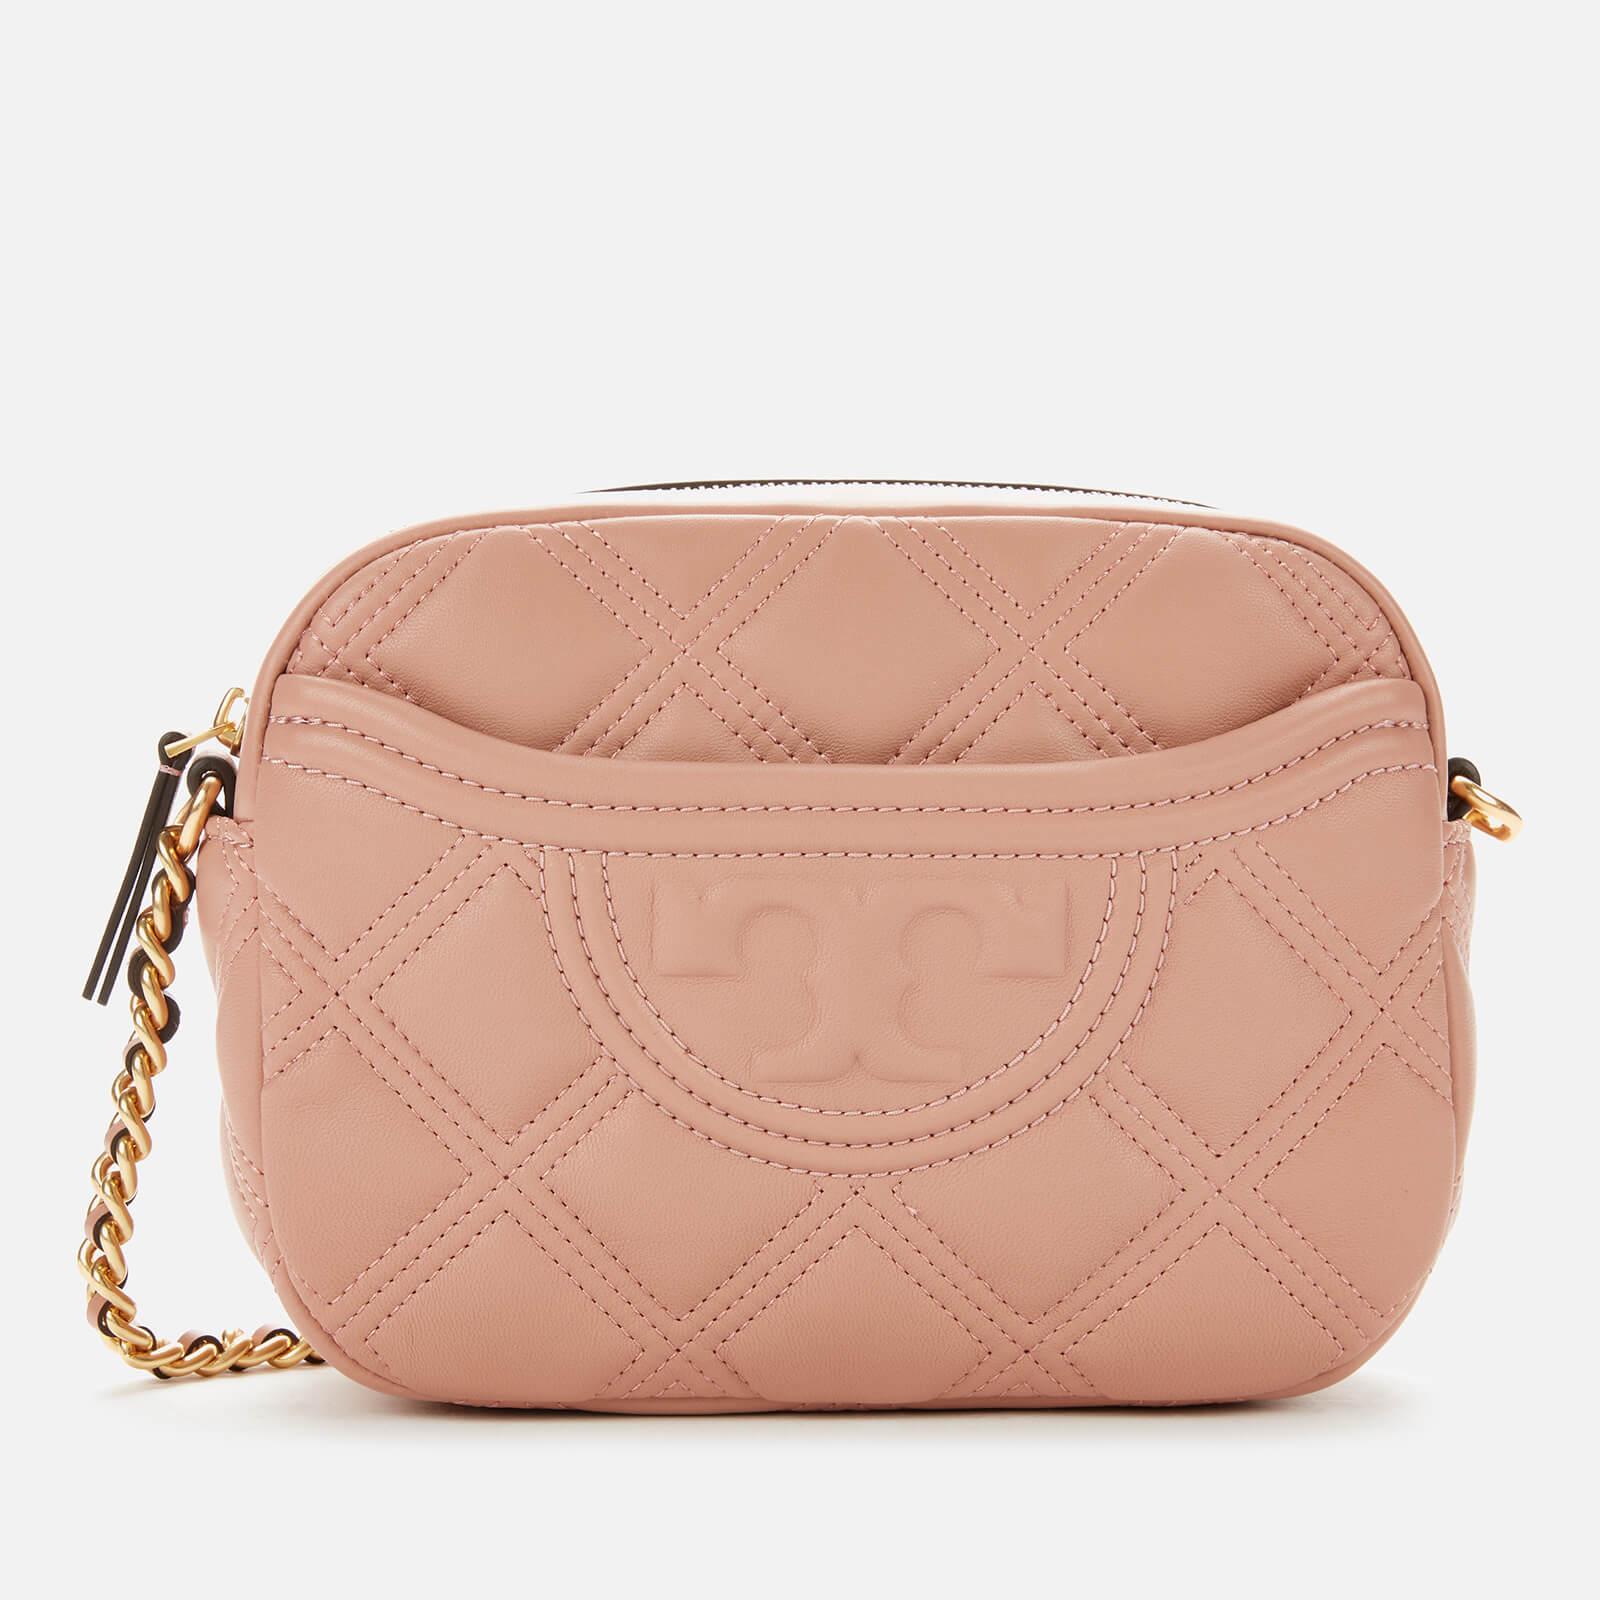 Tory Burch Leather Fleming Soft Camera Bag in Pink - Lyst